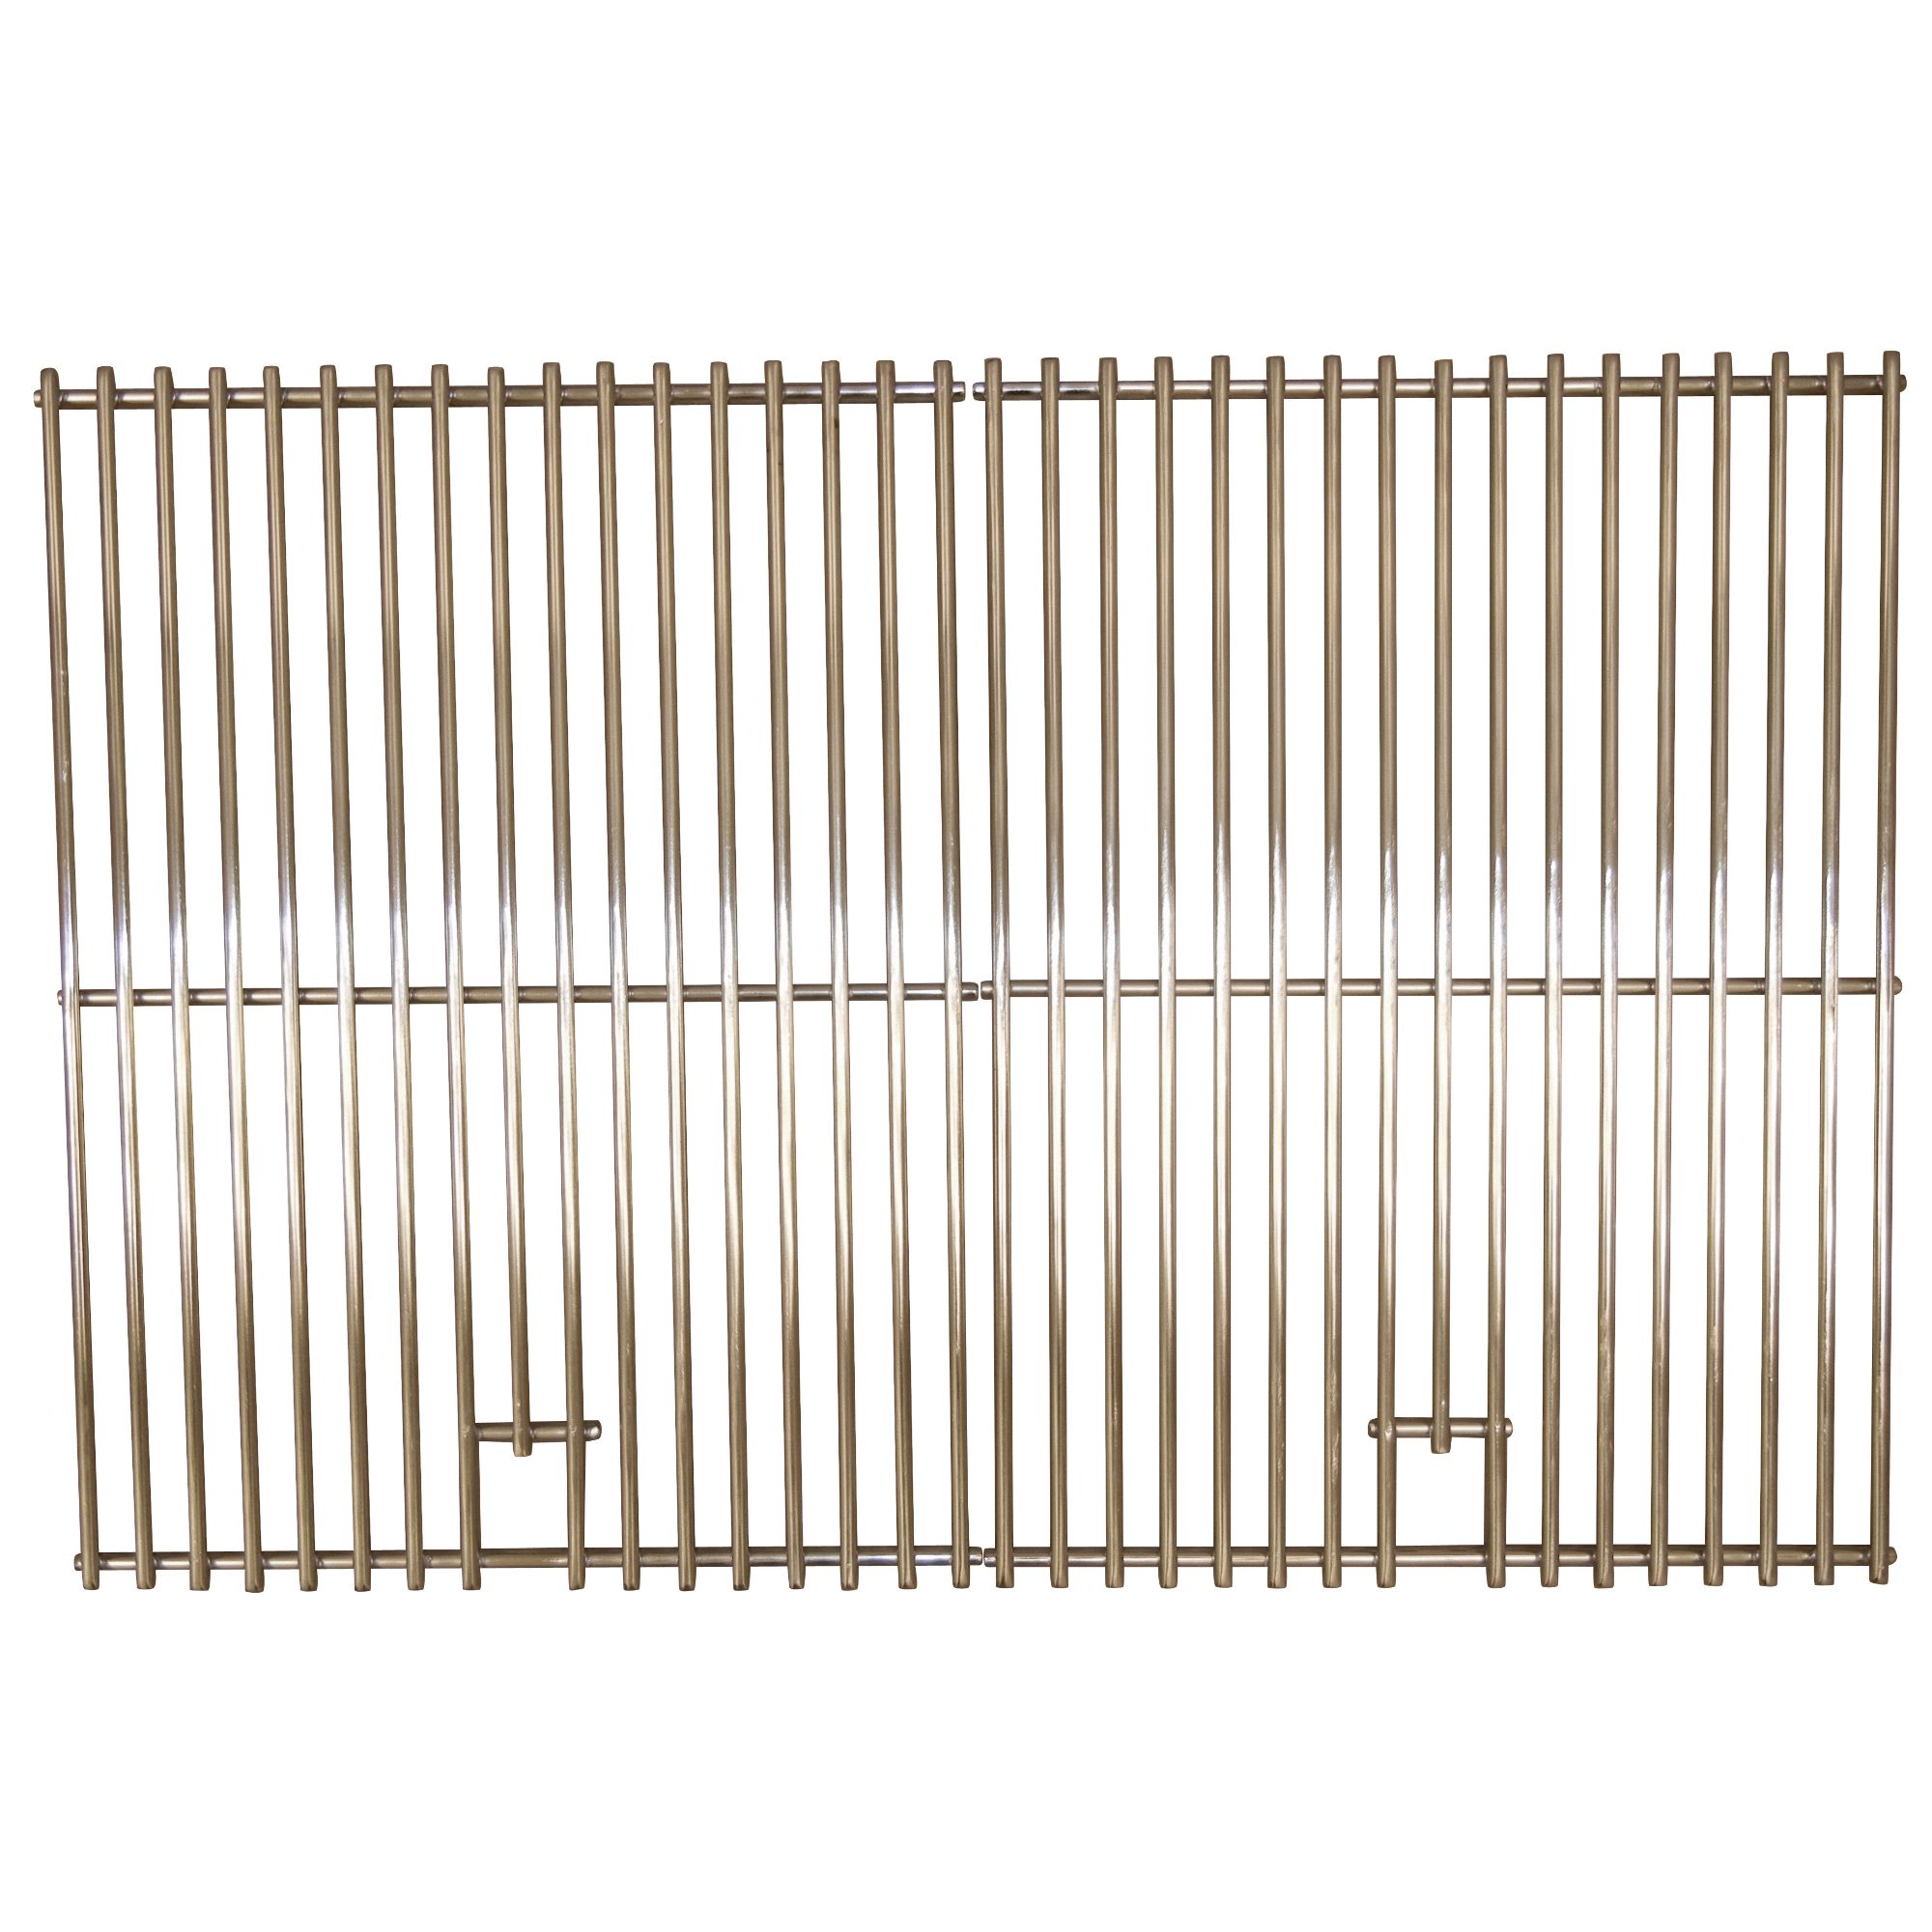 Stainless steel wire cooking grid for Broil King, Broil-Mate, Charbroil, Grill Master, Huntington, Kenmore, Master Forge, Nexgri